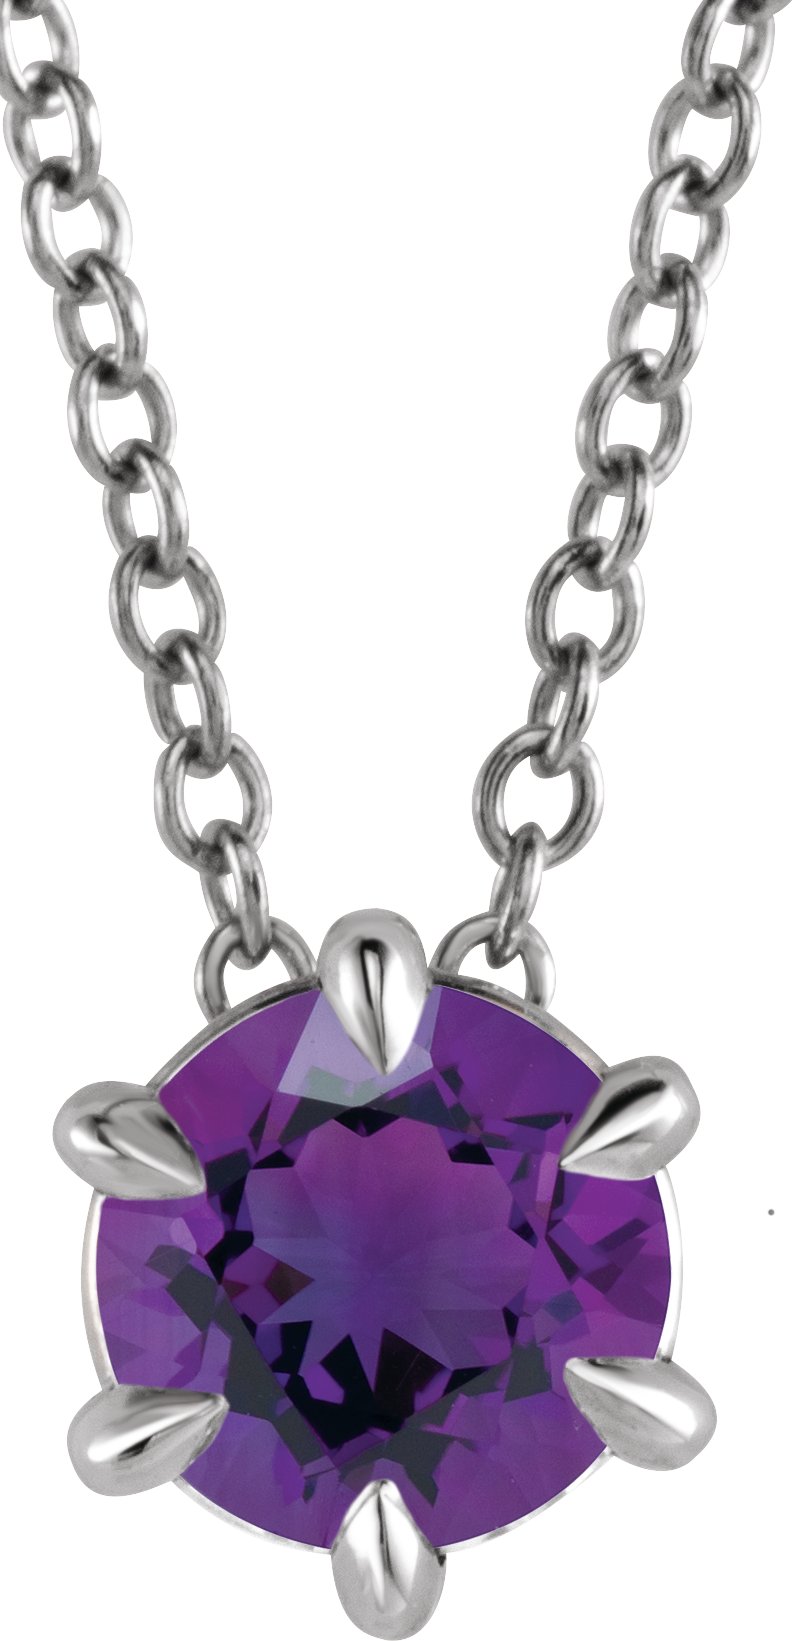 Sterling Silver 4 mm Natural Amethyst Solitaire 16-18" Necklace